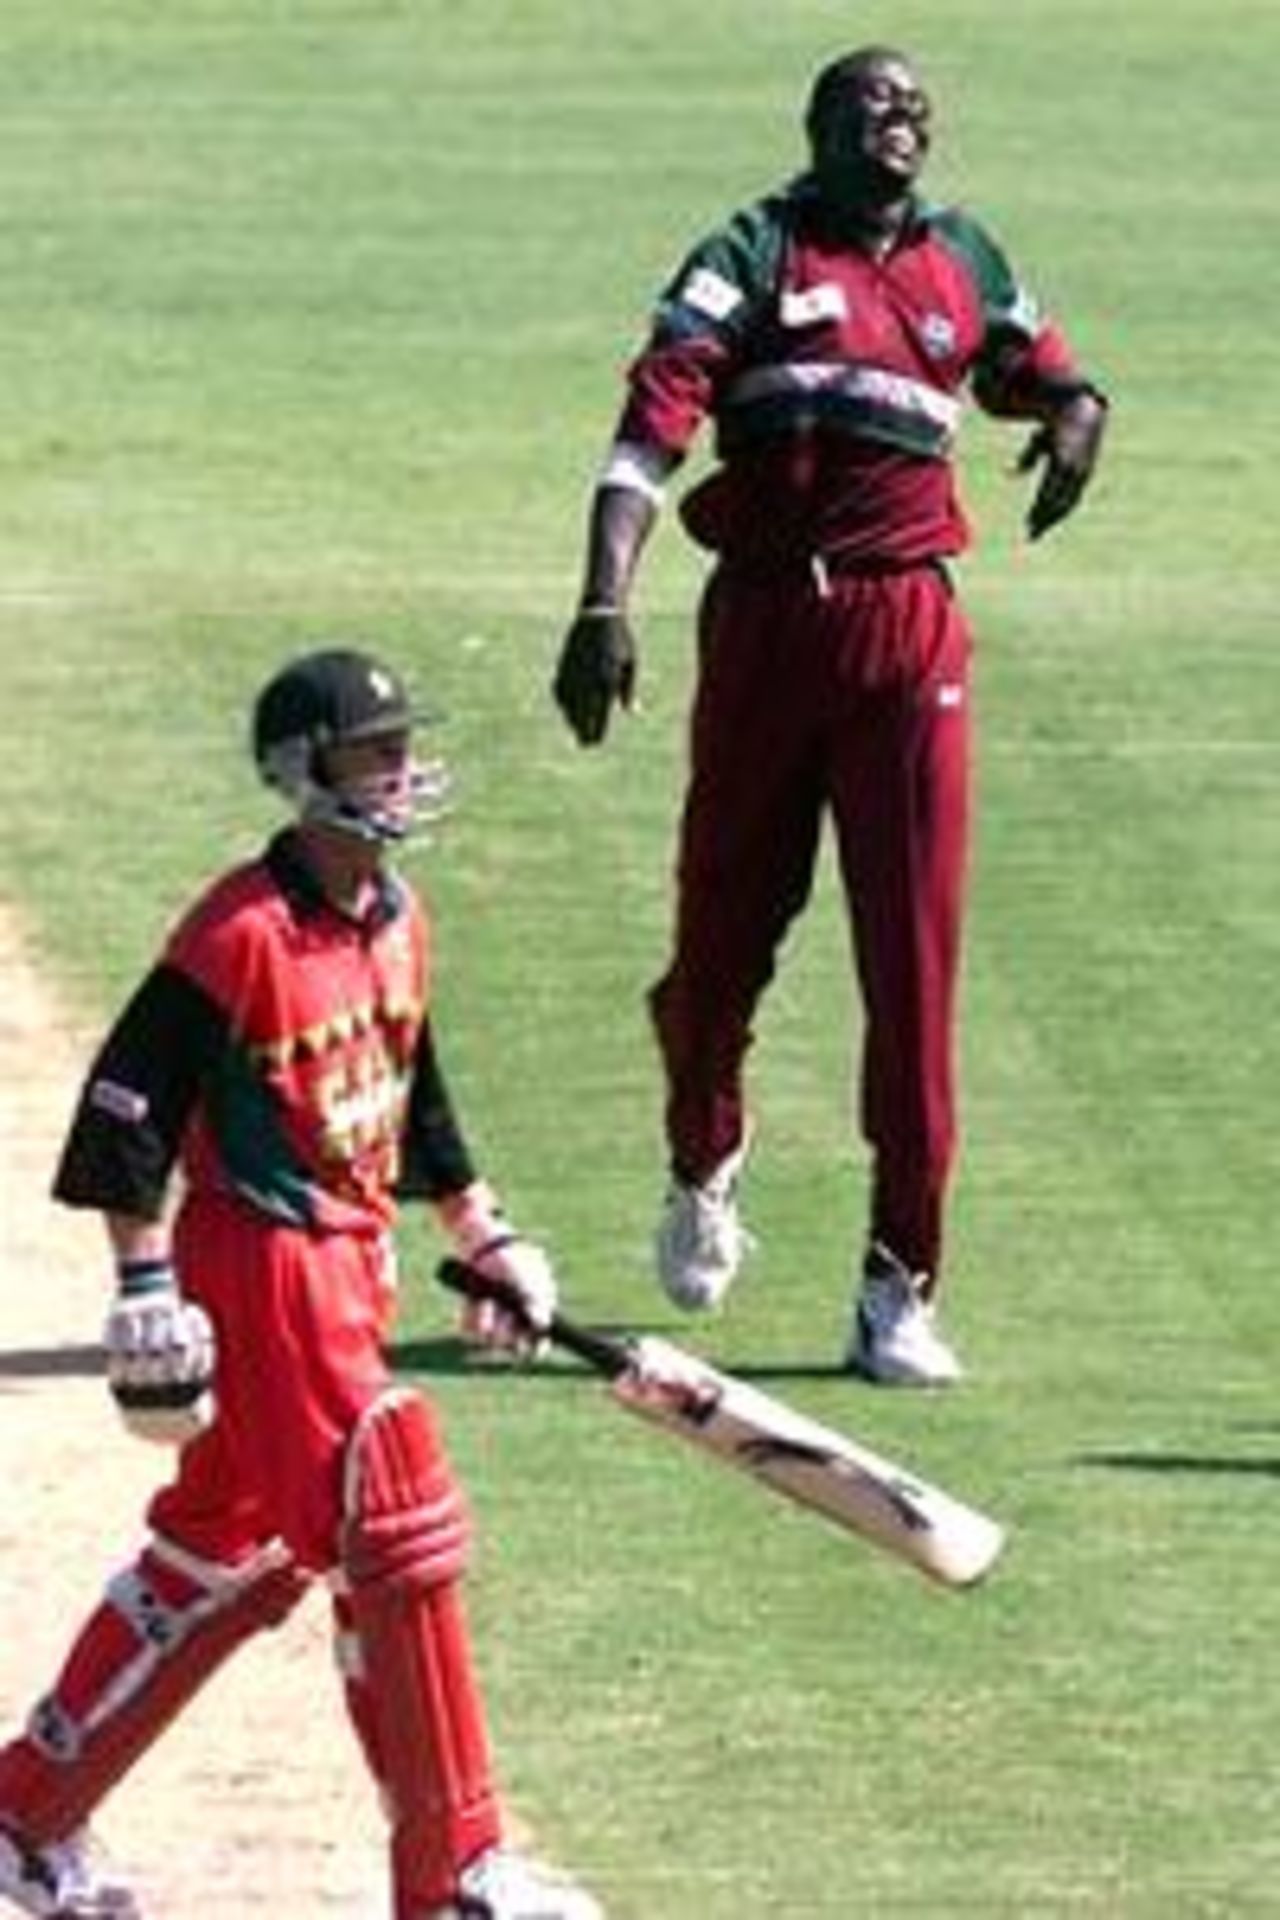 Cameron Cuffy of the West Indies gets the wicket of Grant Flower of Zimbabwe caught behind,Cuffy finished with the figures of 4/24 during the one day International between Zimbabwe and the West Indies played at the Sydney Cricket Ground,Sydney,Australia